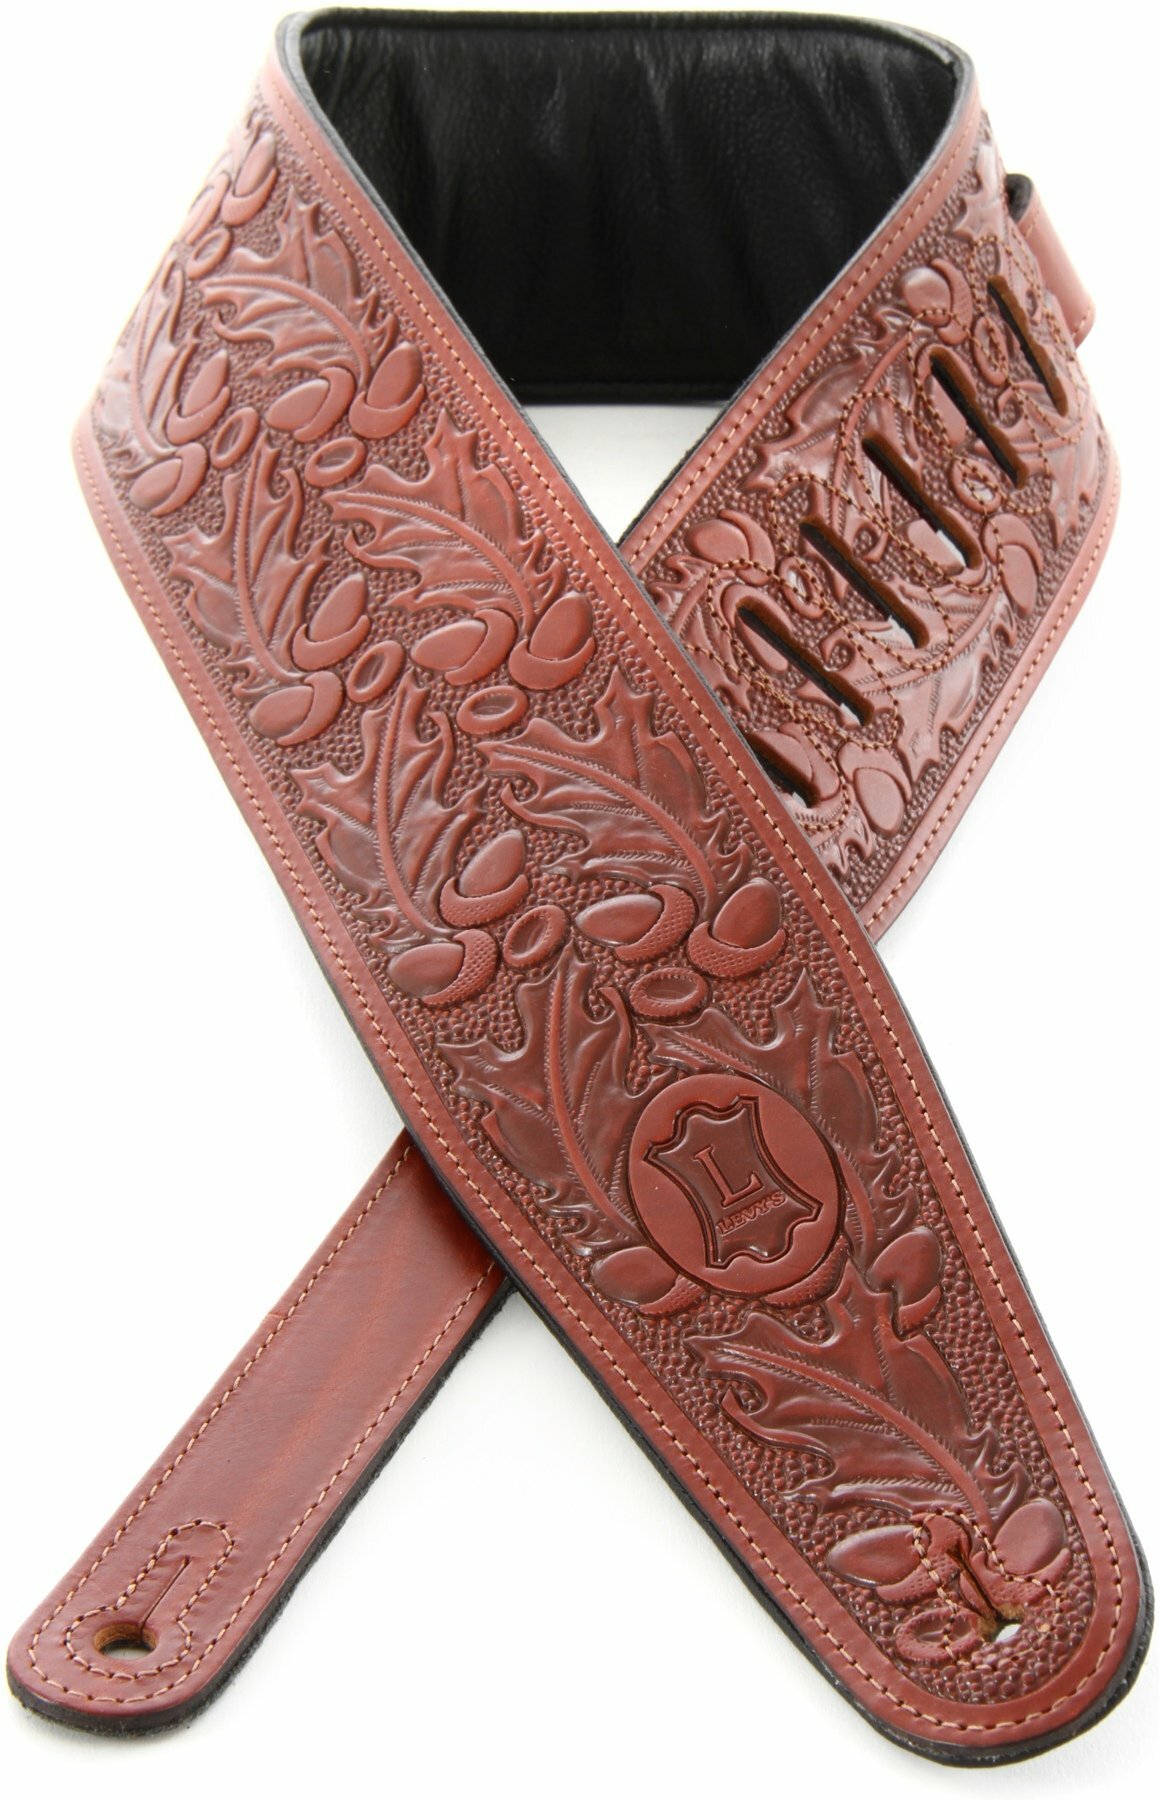 Levy's Classic Tooled Leather Pm44t01 3inc Regular Walnut - Guitar strap - Main picture